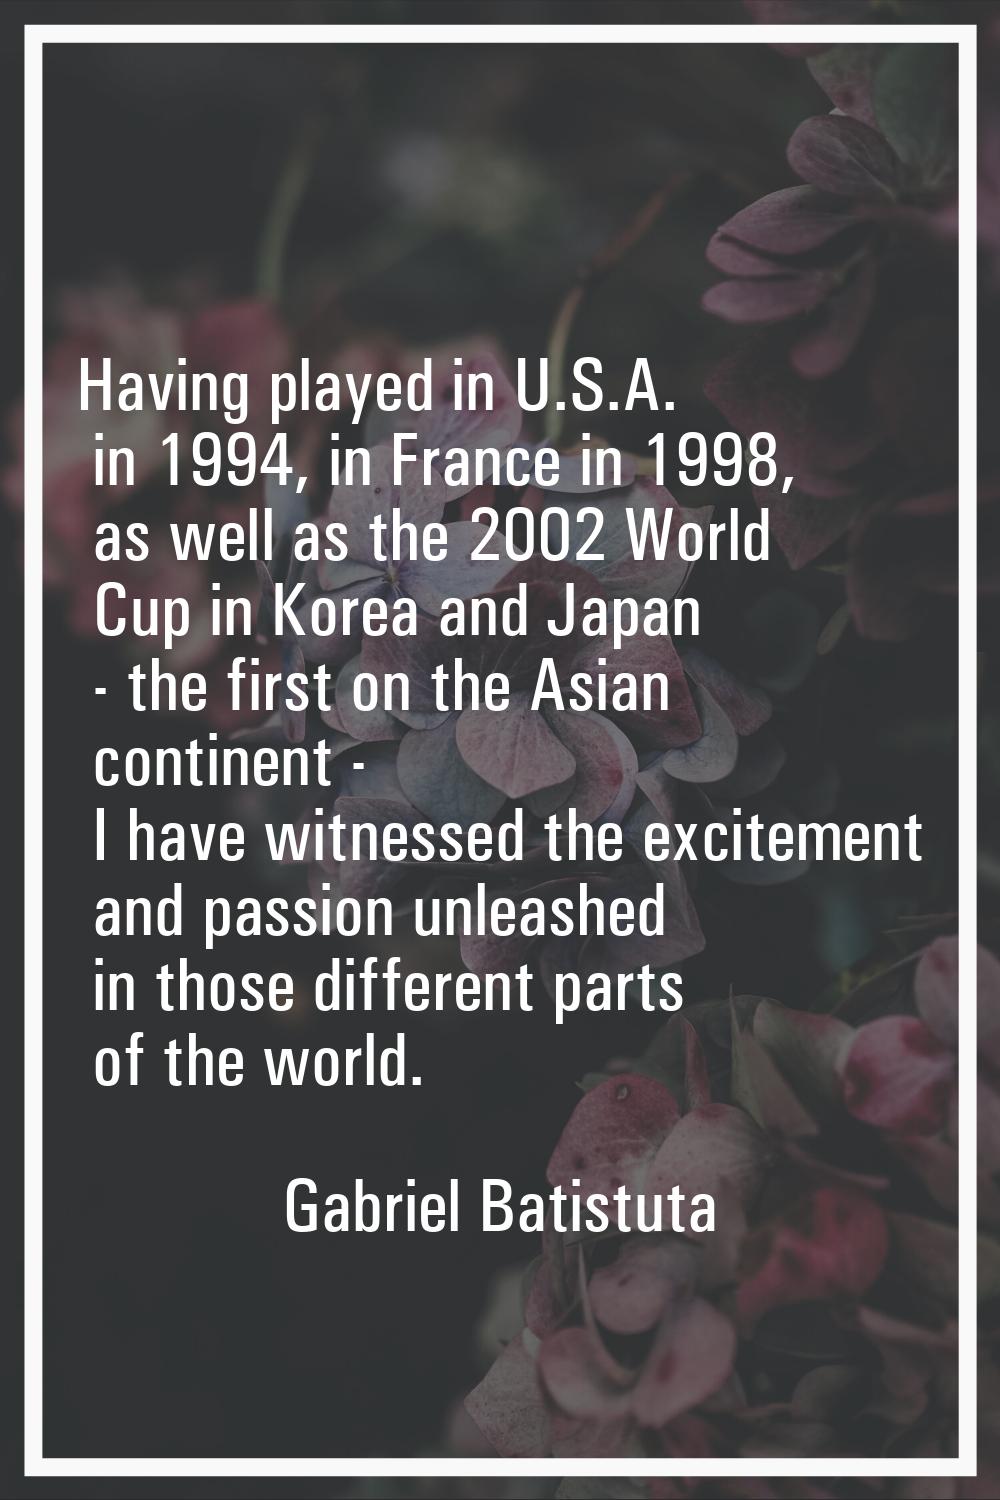 Having played in U.S.A. in 1994, in France in 1998, as well as the 2002 World Cup in Korea and Japa